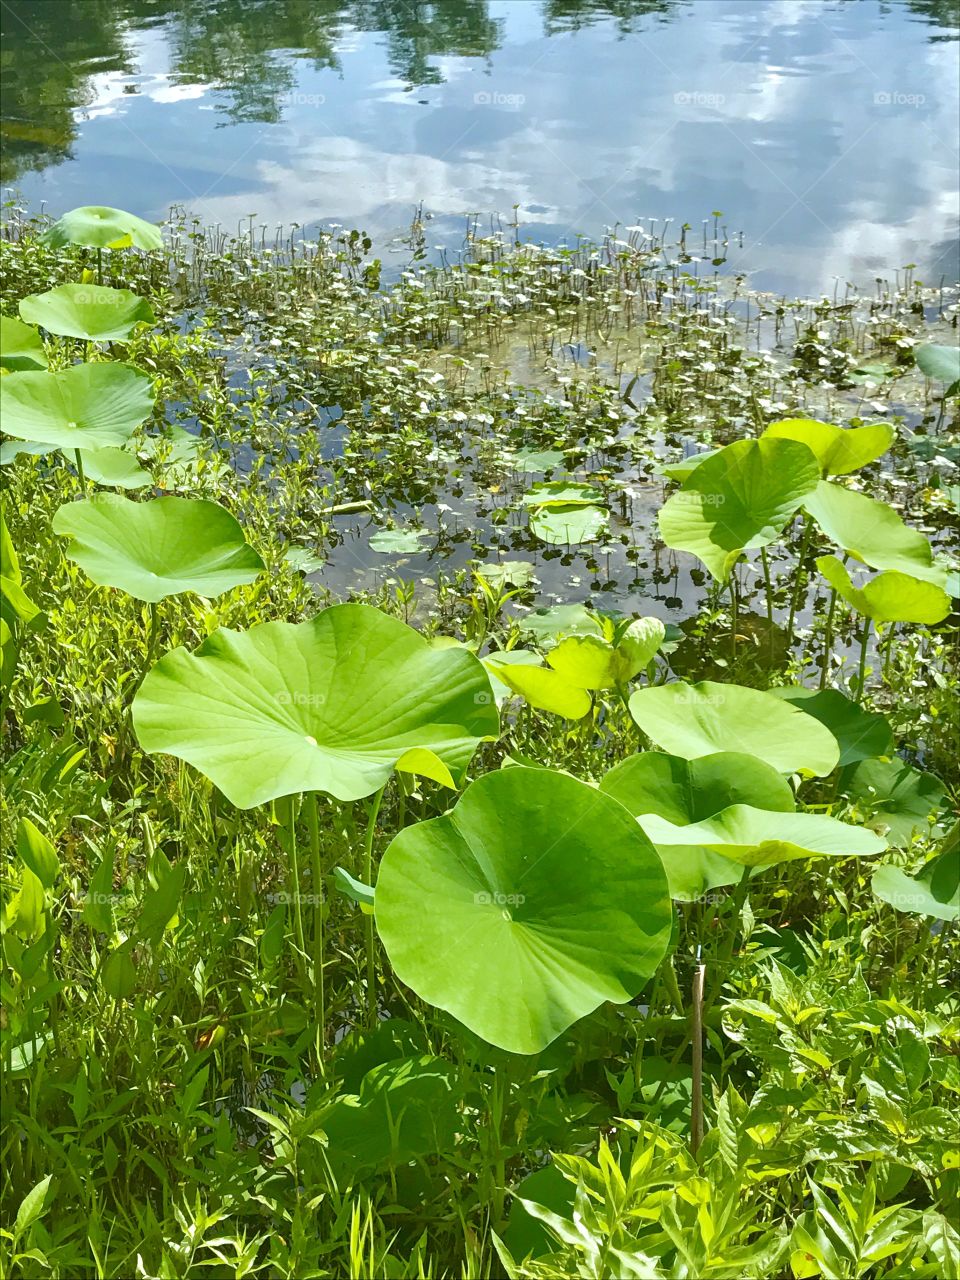 Lily Pads by Water